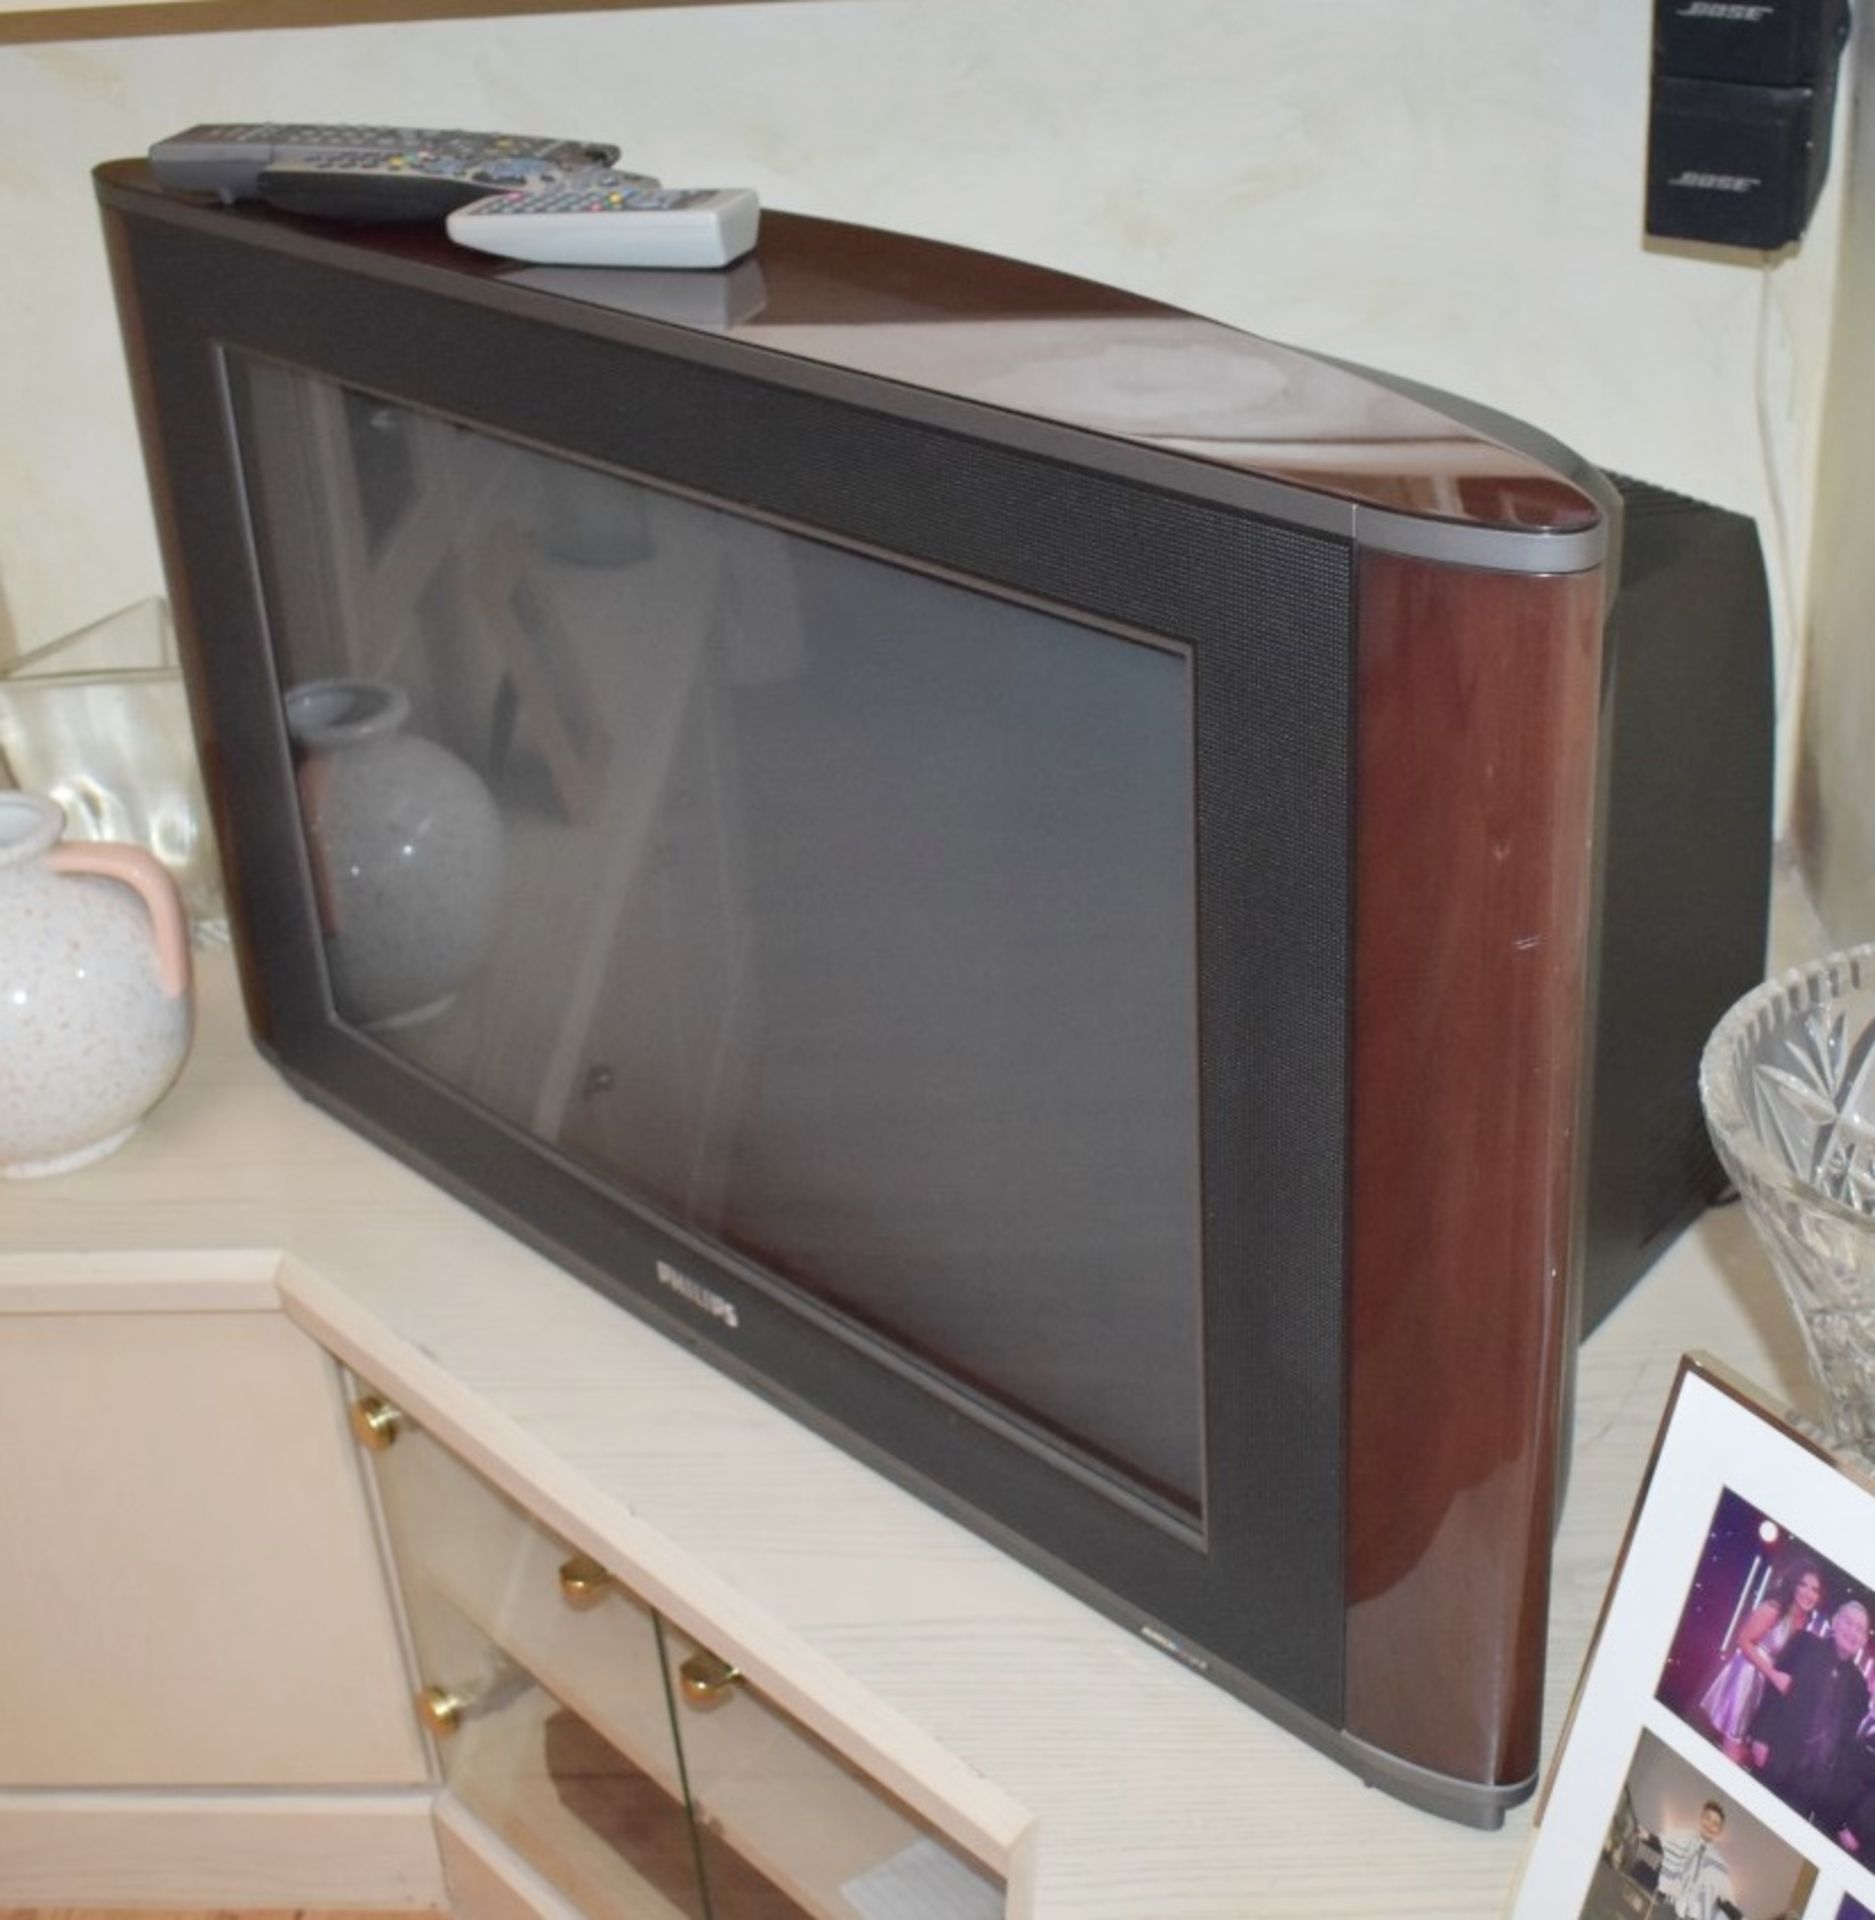 1 x Retro Philips CRT Television With Cherrywood Finish and Matching Stand - CL579 - No VAT on the